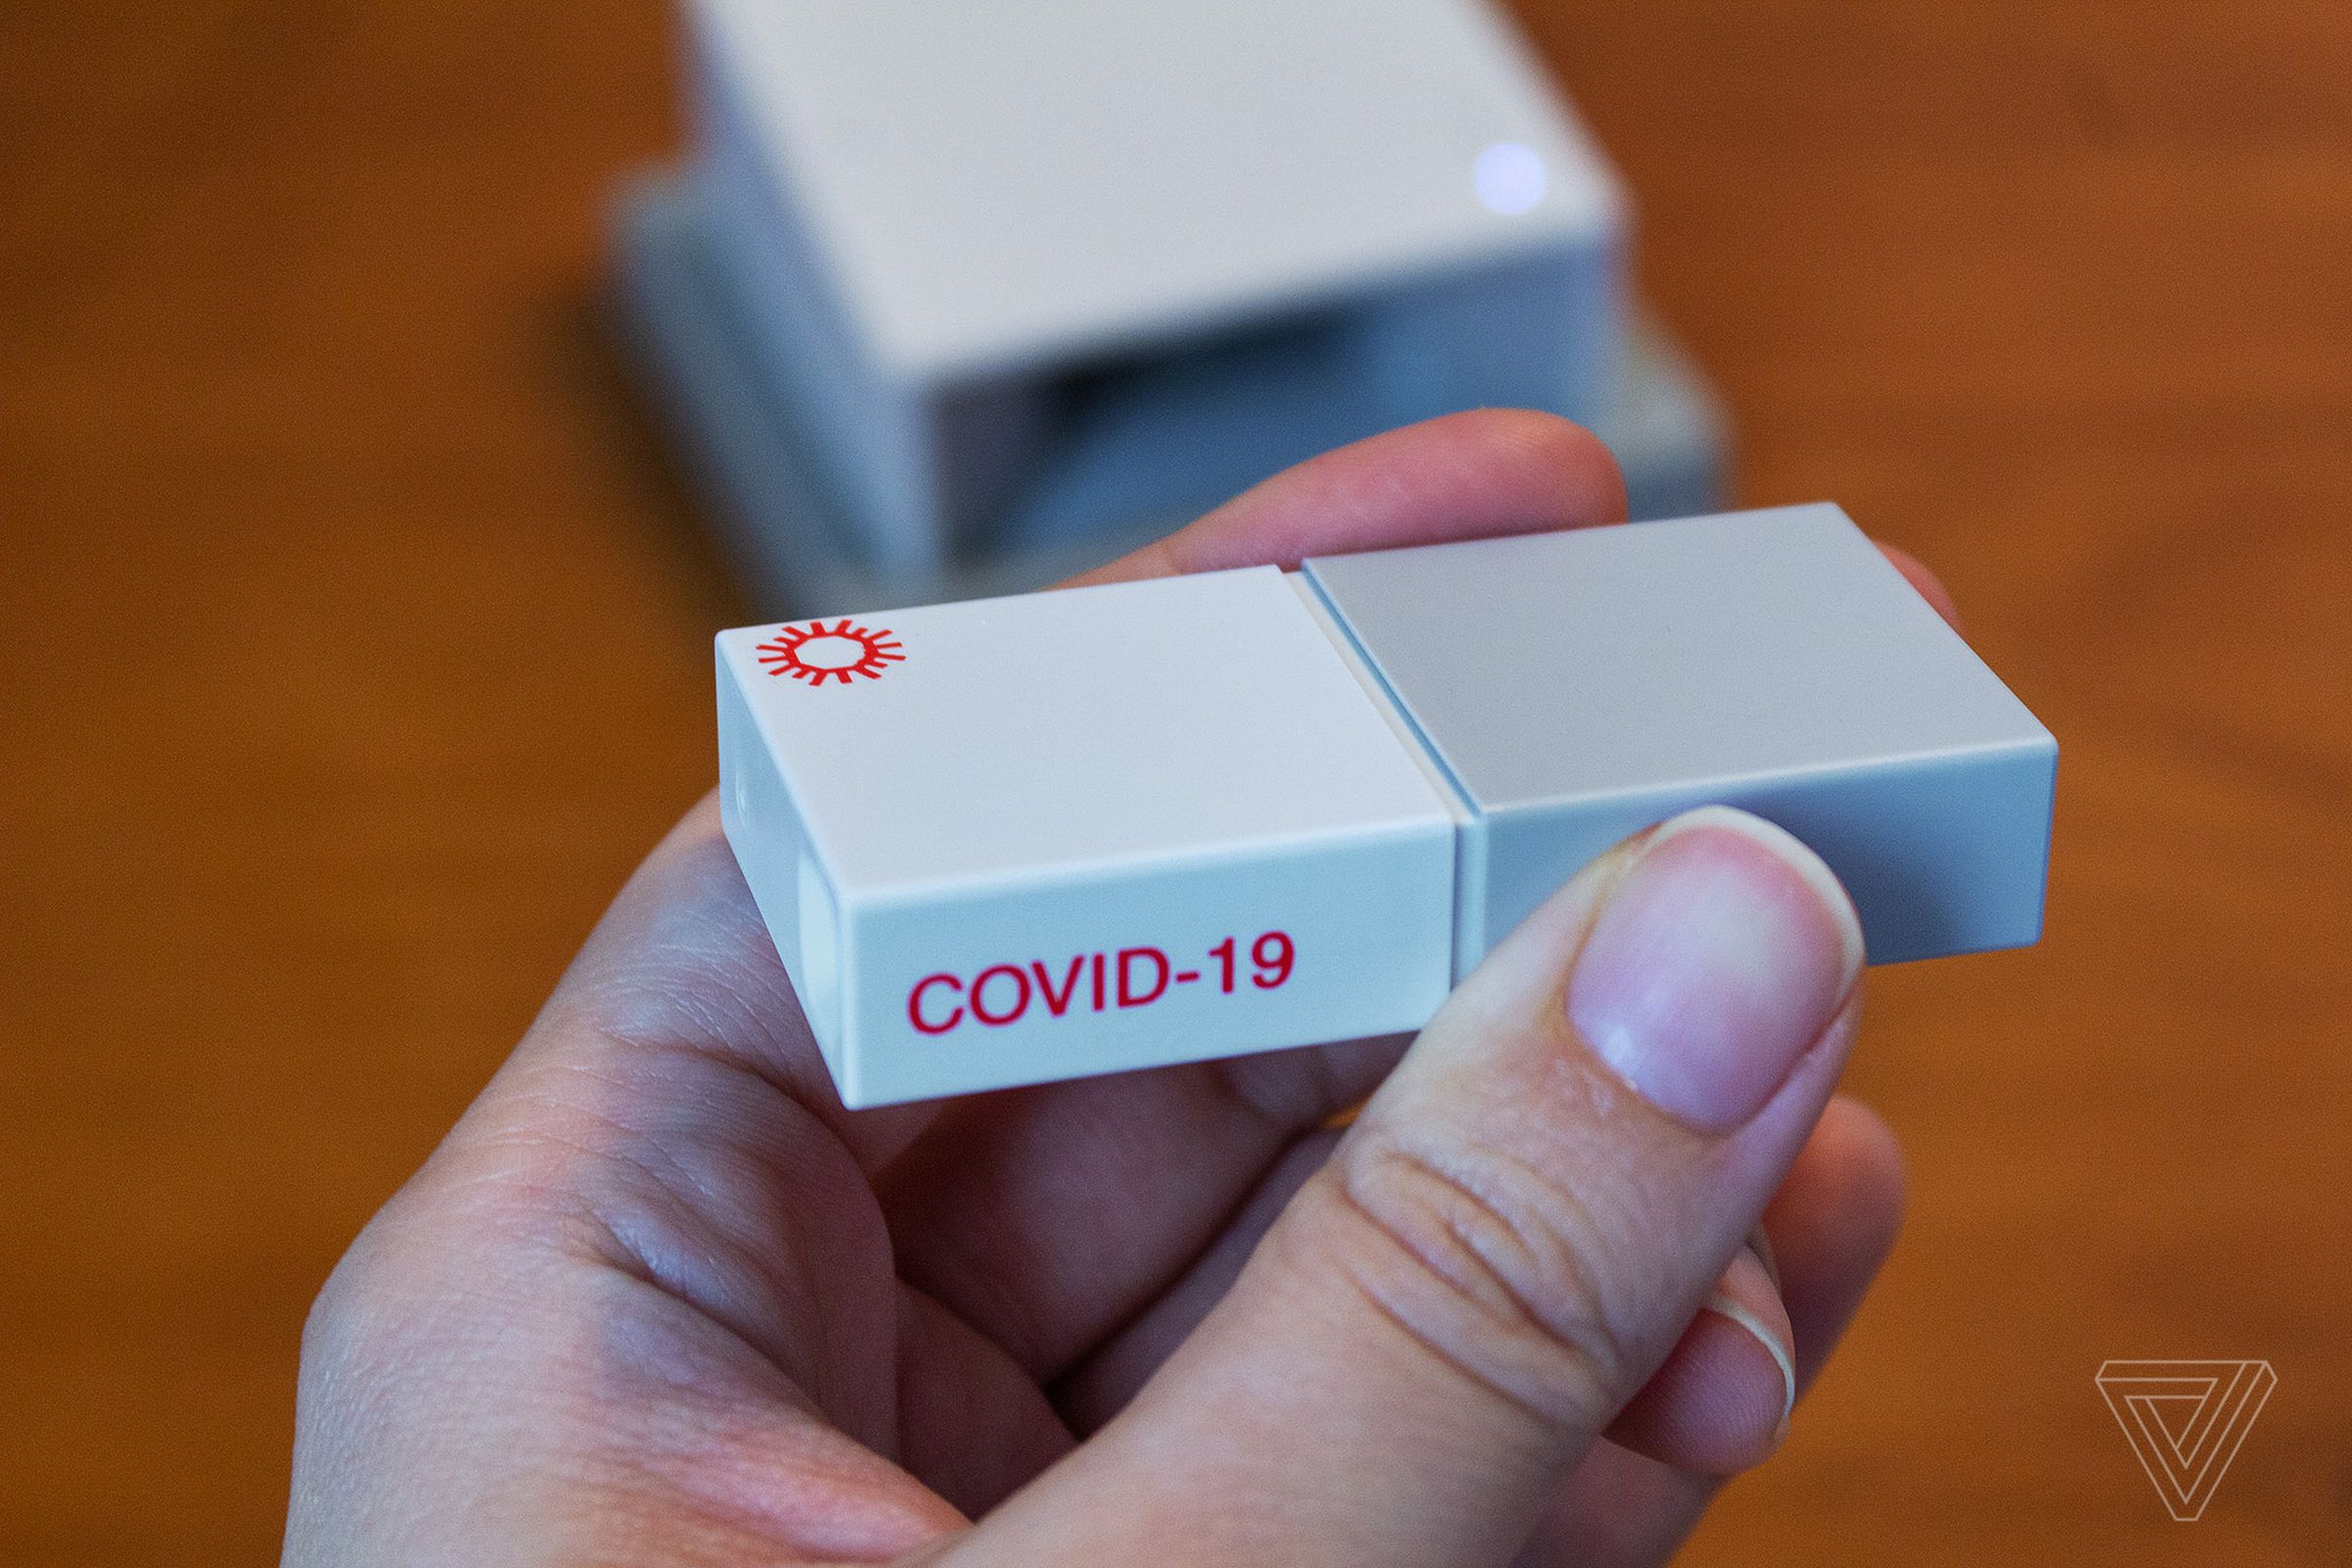 Did you know you can buy over-the-counter molecular COVID-19 tests?